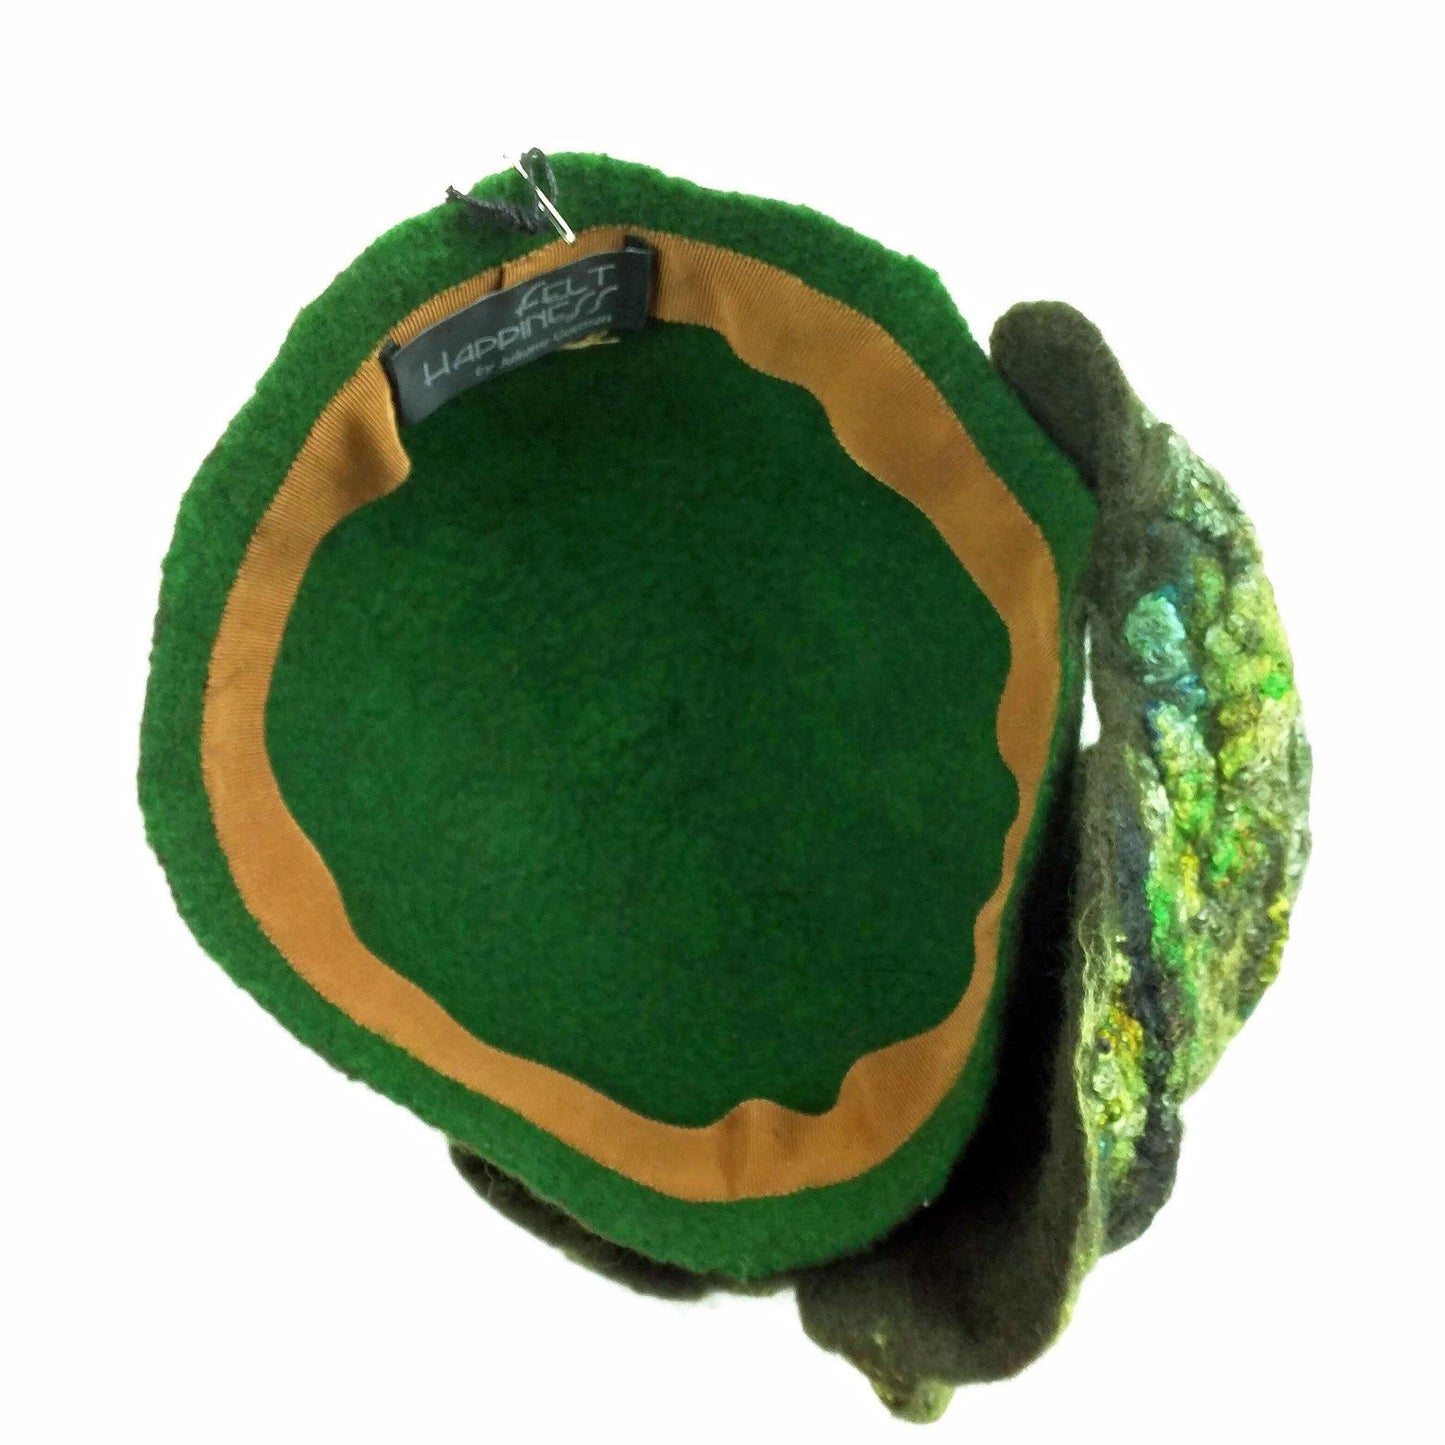 Green Colored, Mossy Forest, Retro Pillbox Hat - inside view